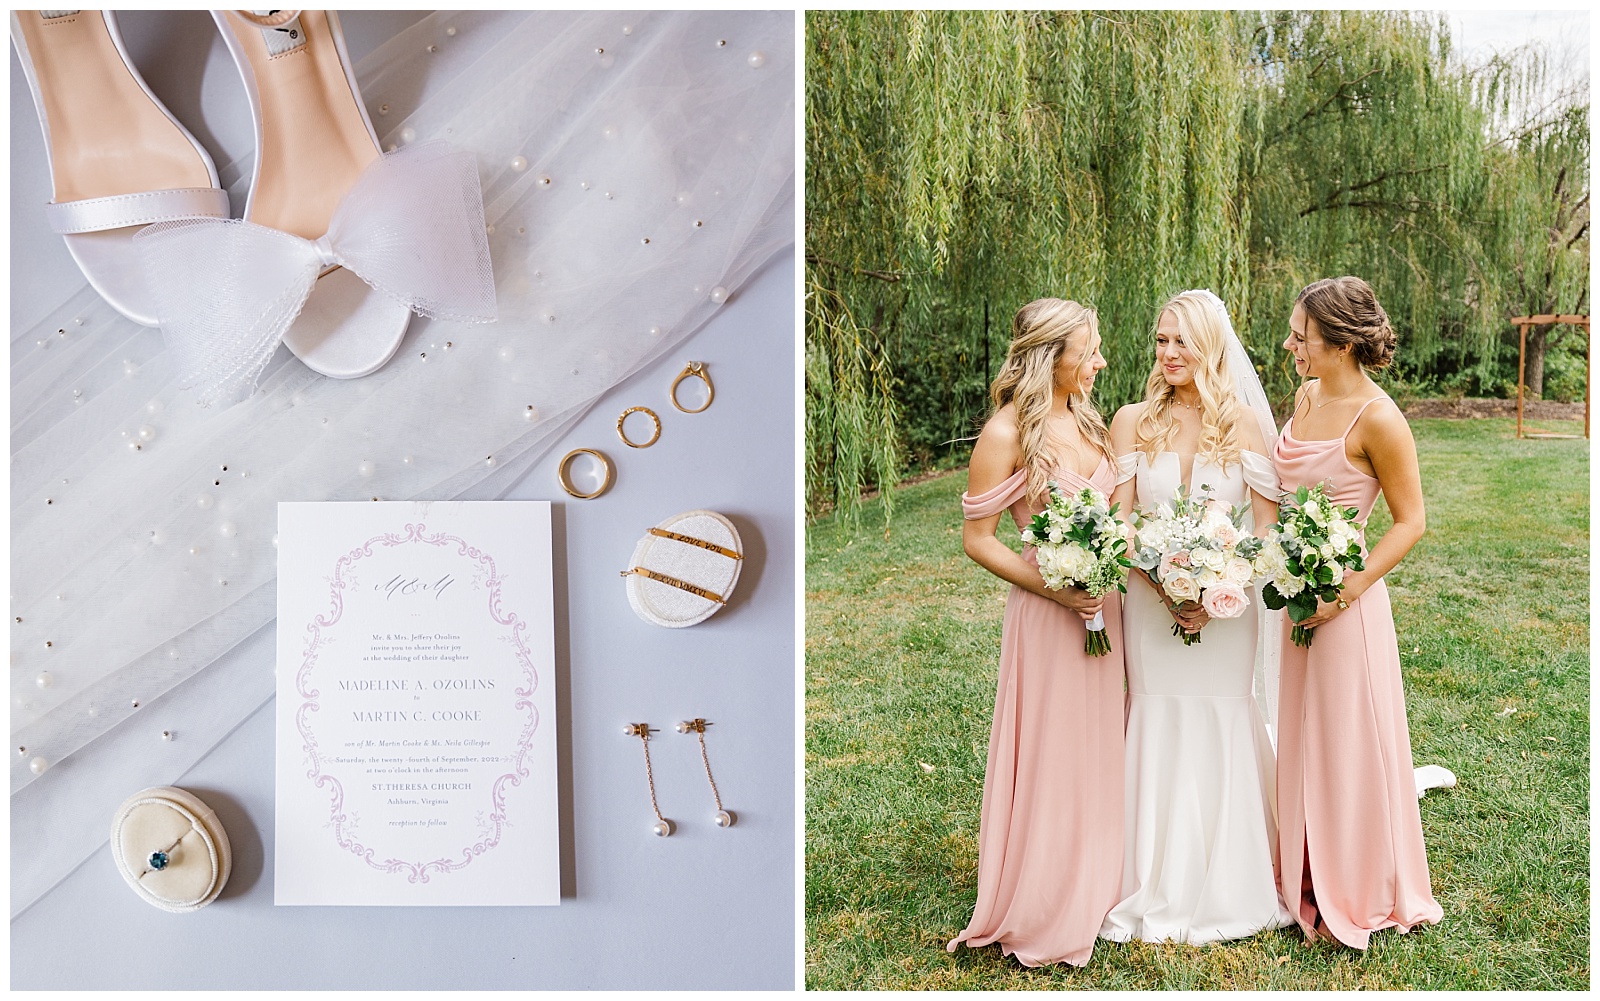 Wedding Timeline Planning tips for your photographer